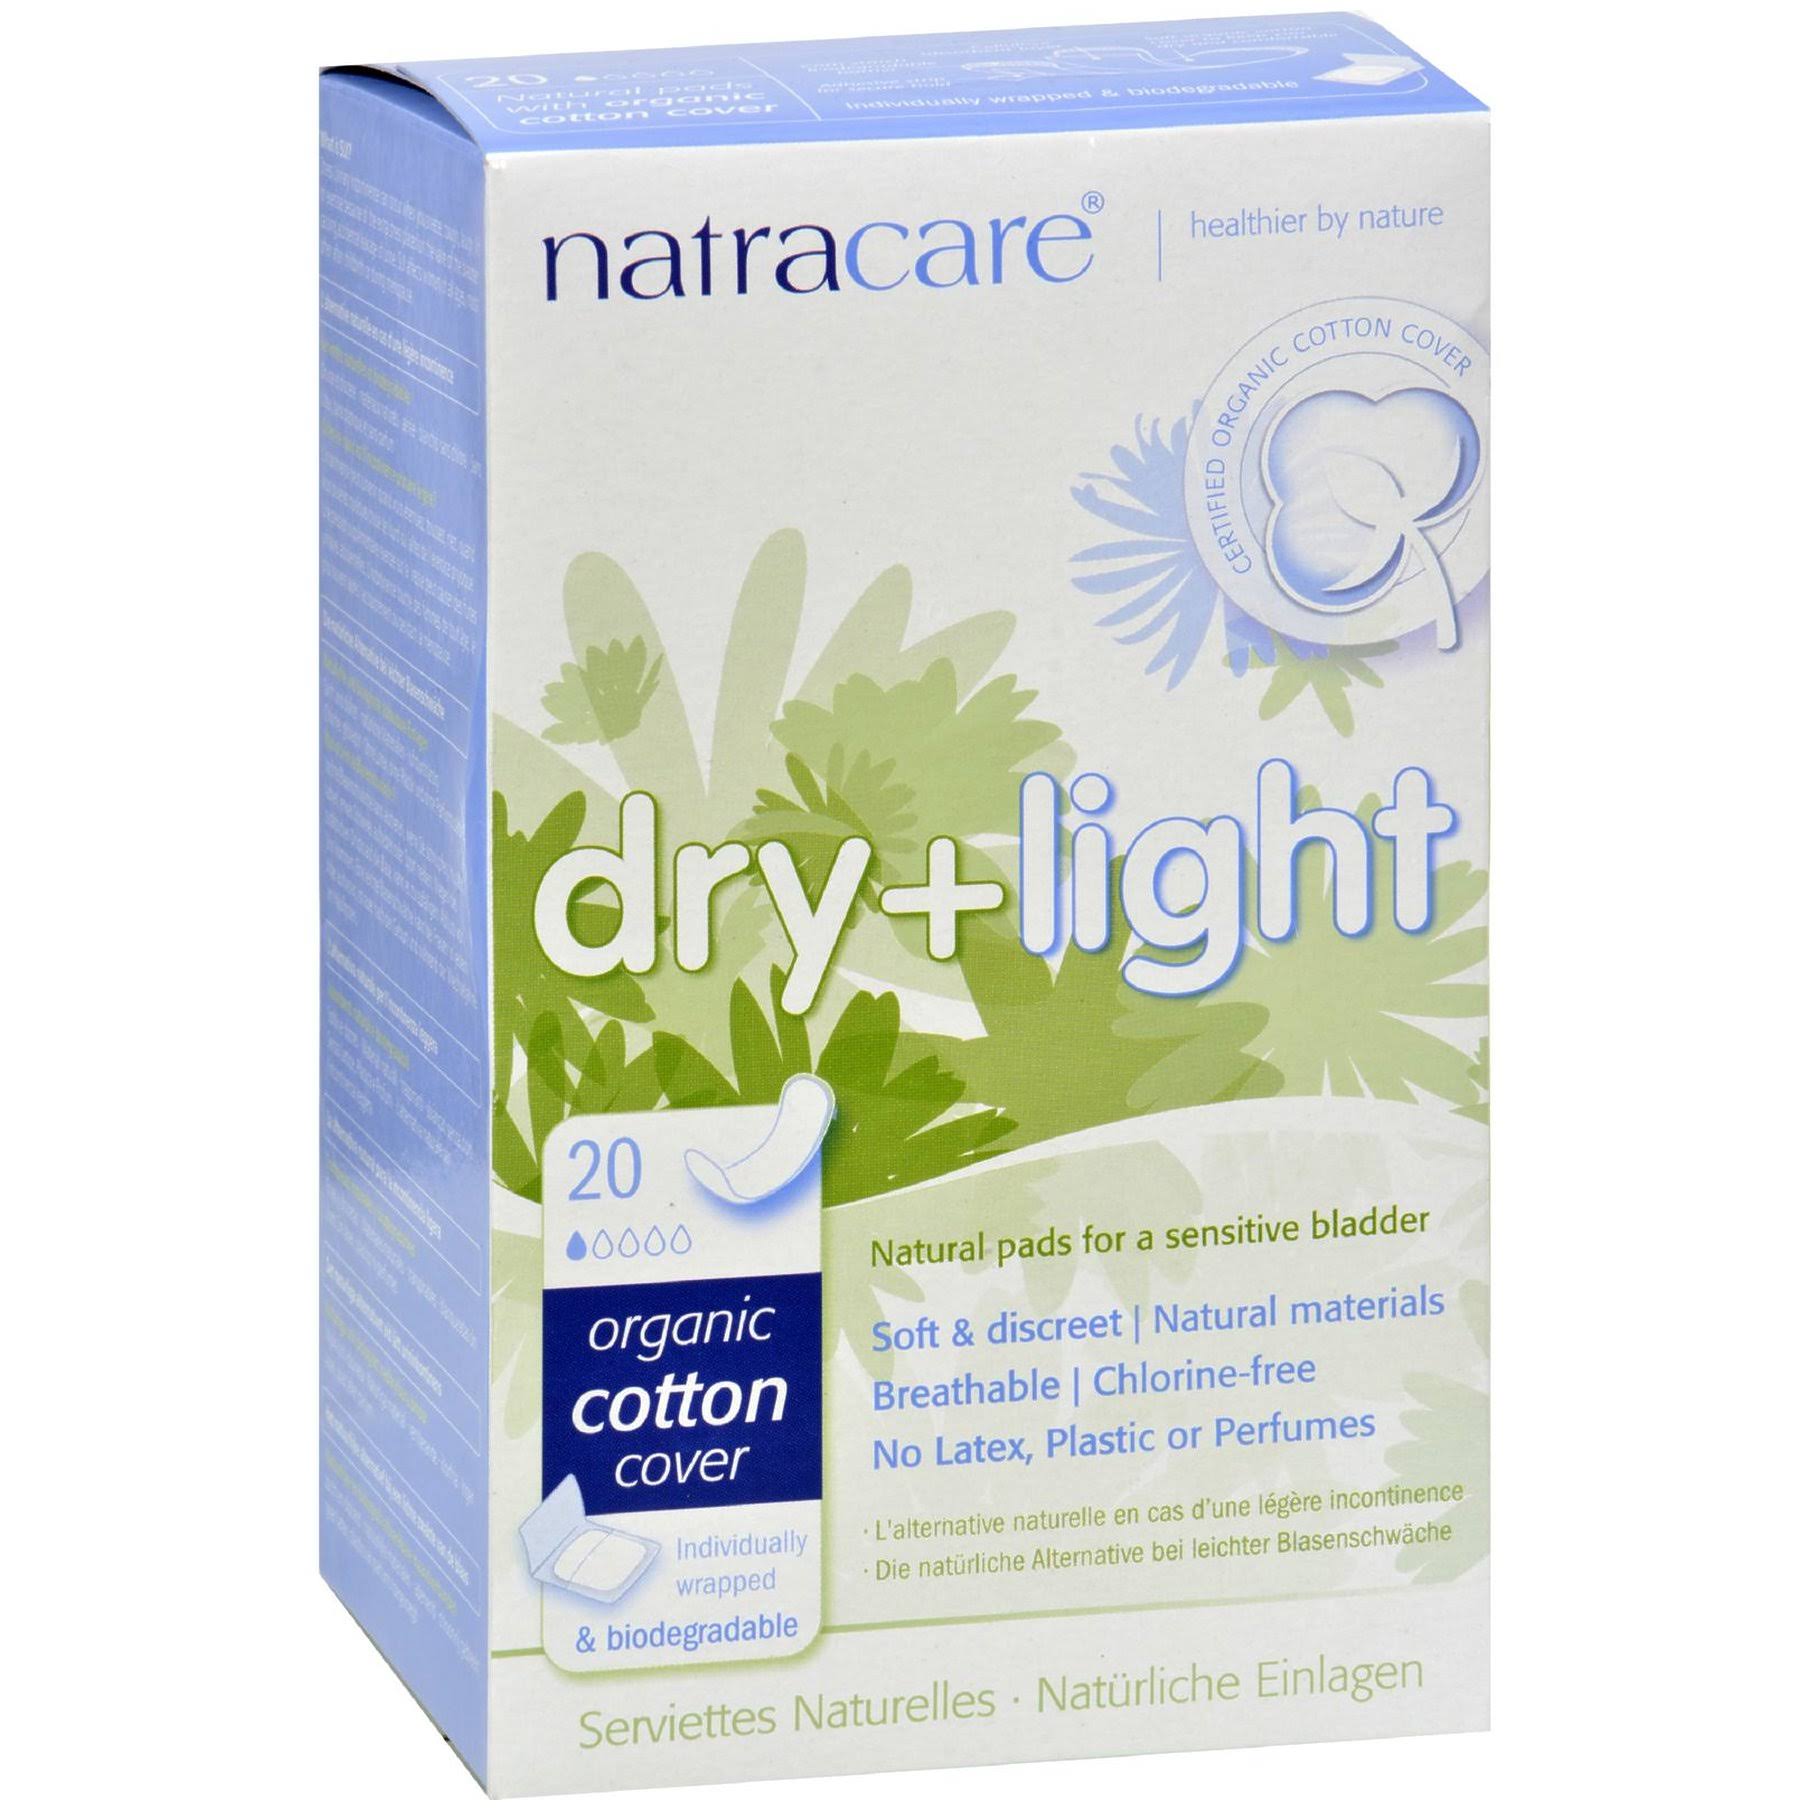 Natracare 57136 Dry and Light Natural Incontinence Pads - 20ct